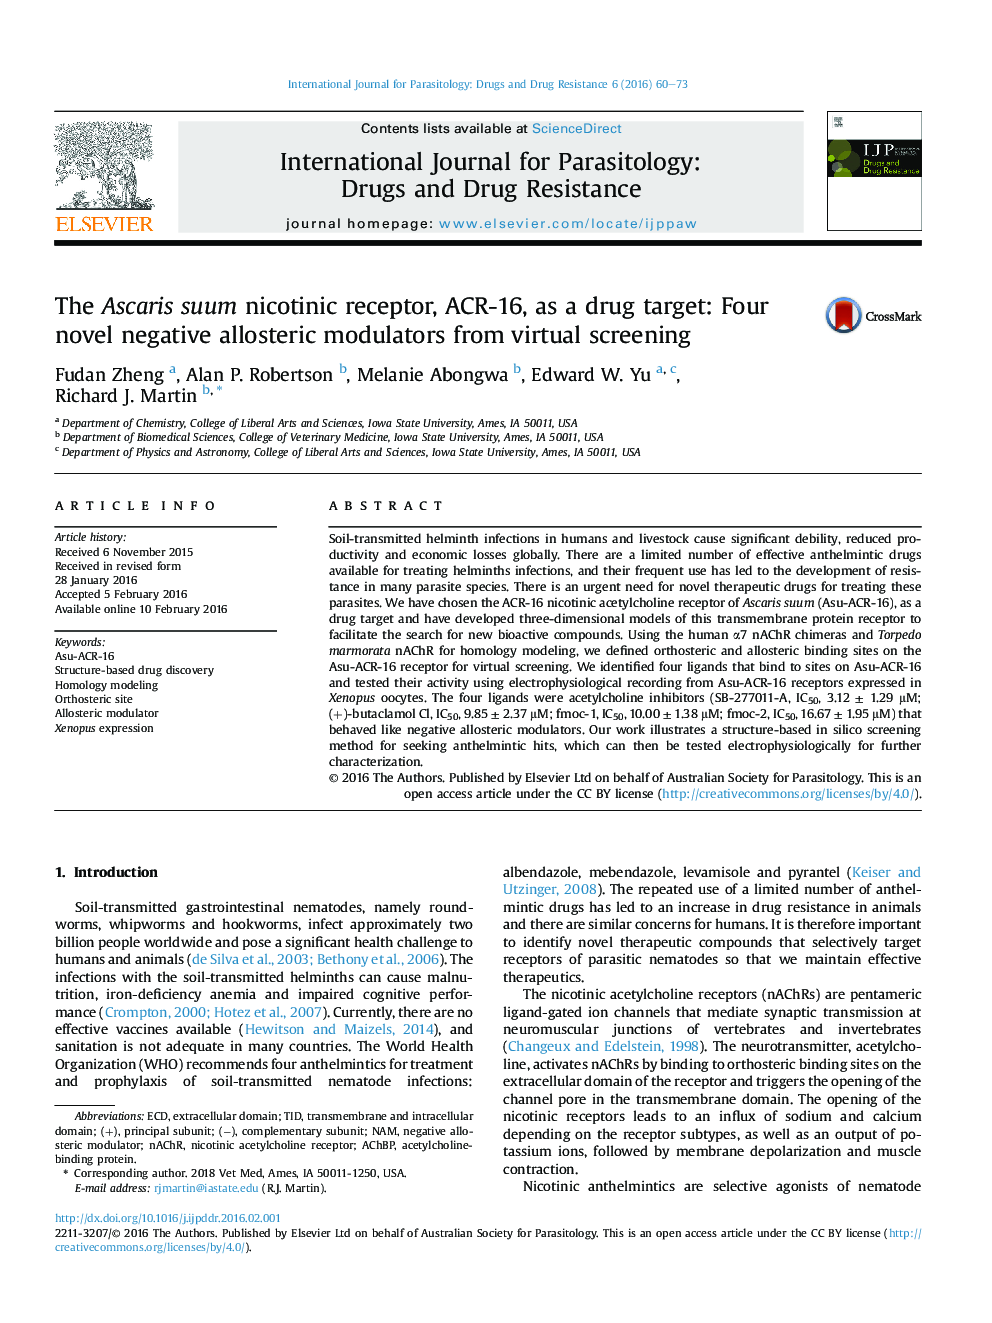 The Ascaris suum nicotinic receptor, ACR-16, as a drug target: Four novel negative allosteric modulators from virtual screening